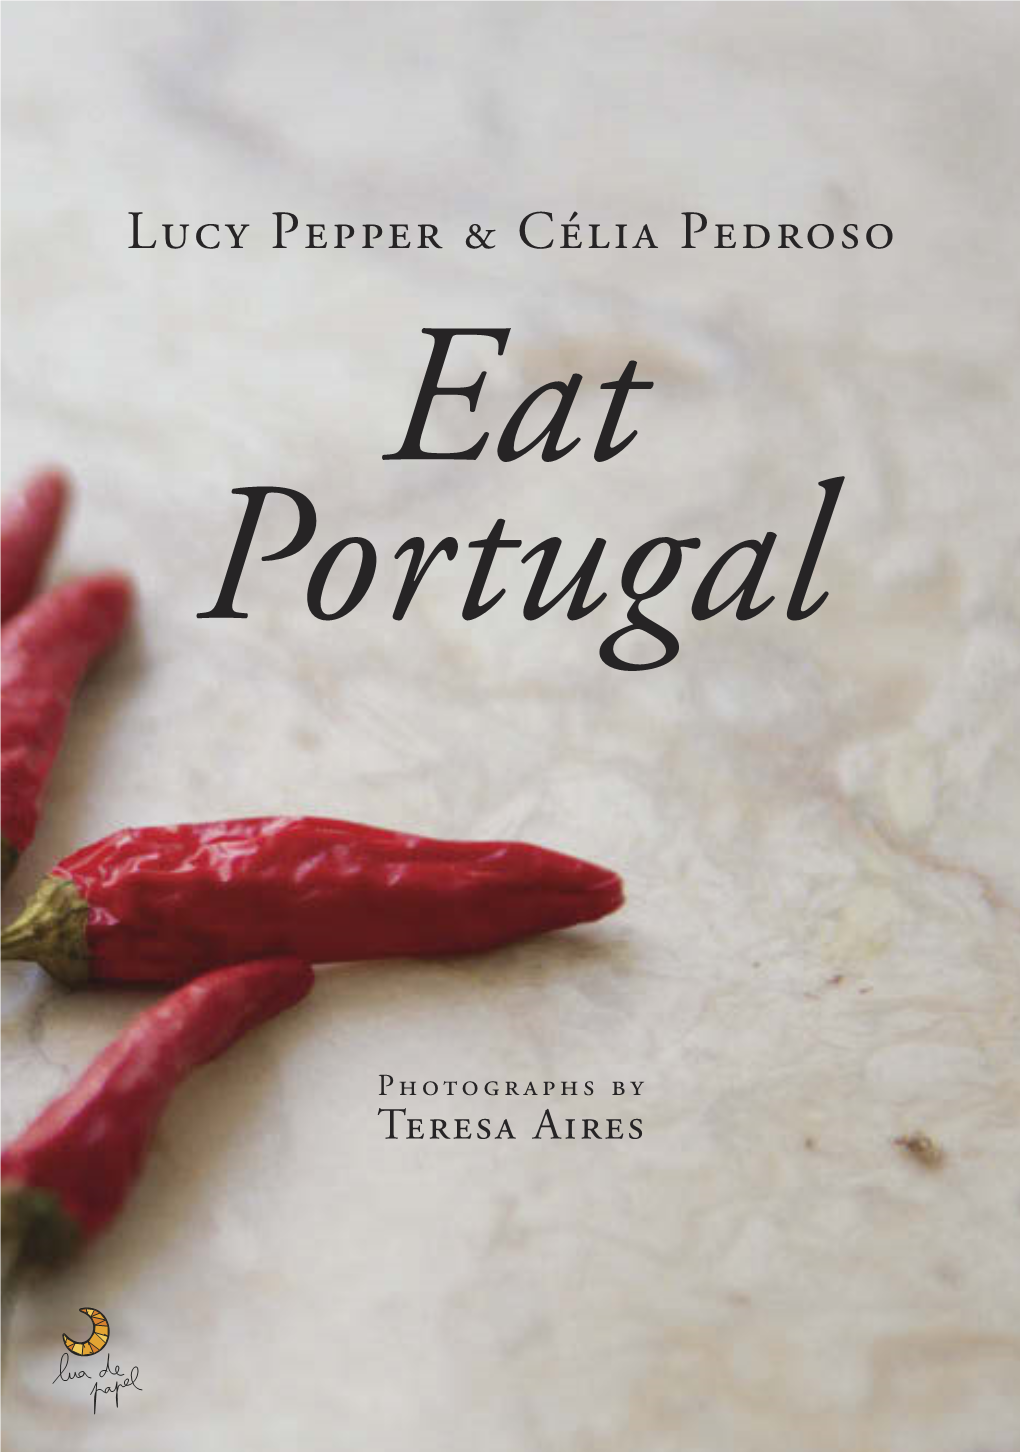 Eat Portugal Is Separated Into Five Easy-To-Read Colour-Coded Sections